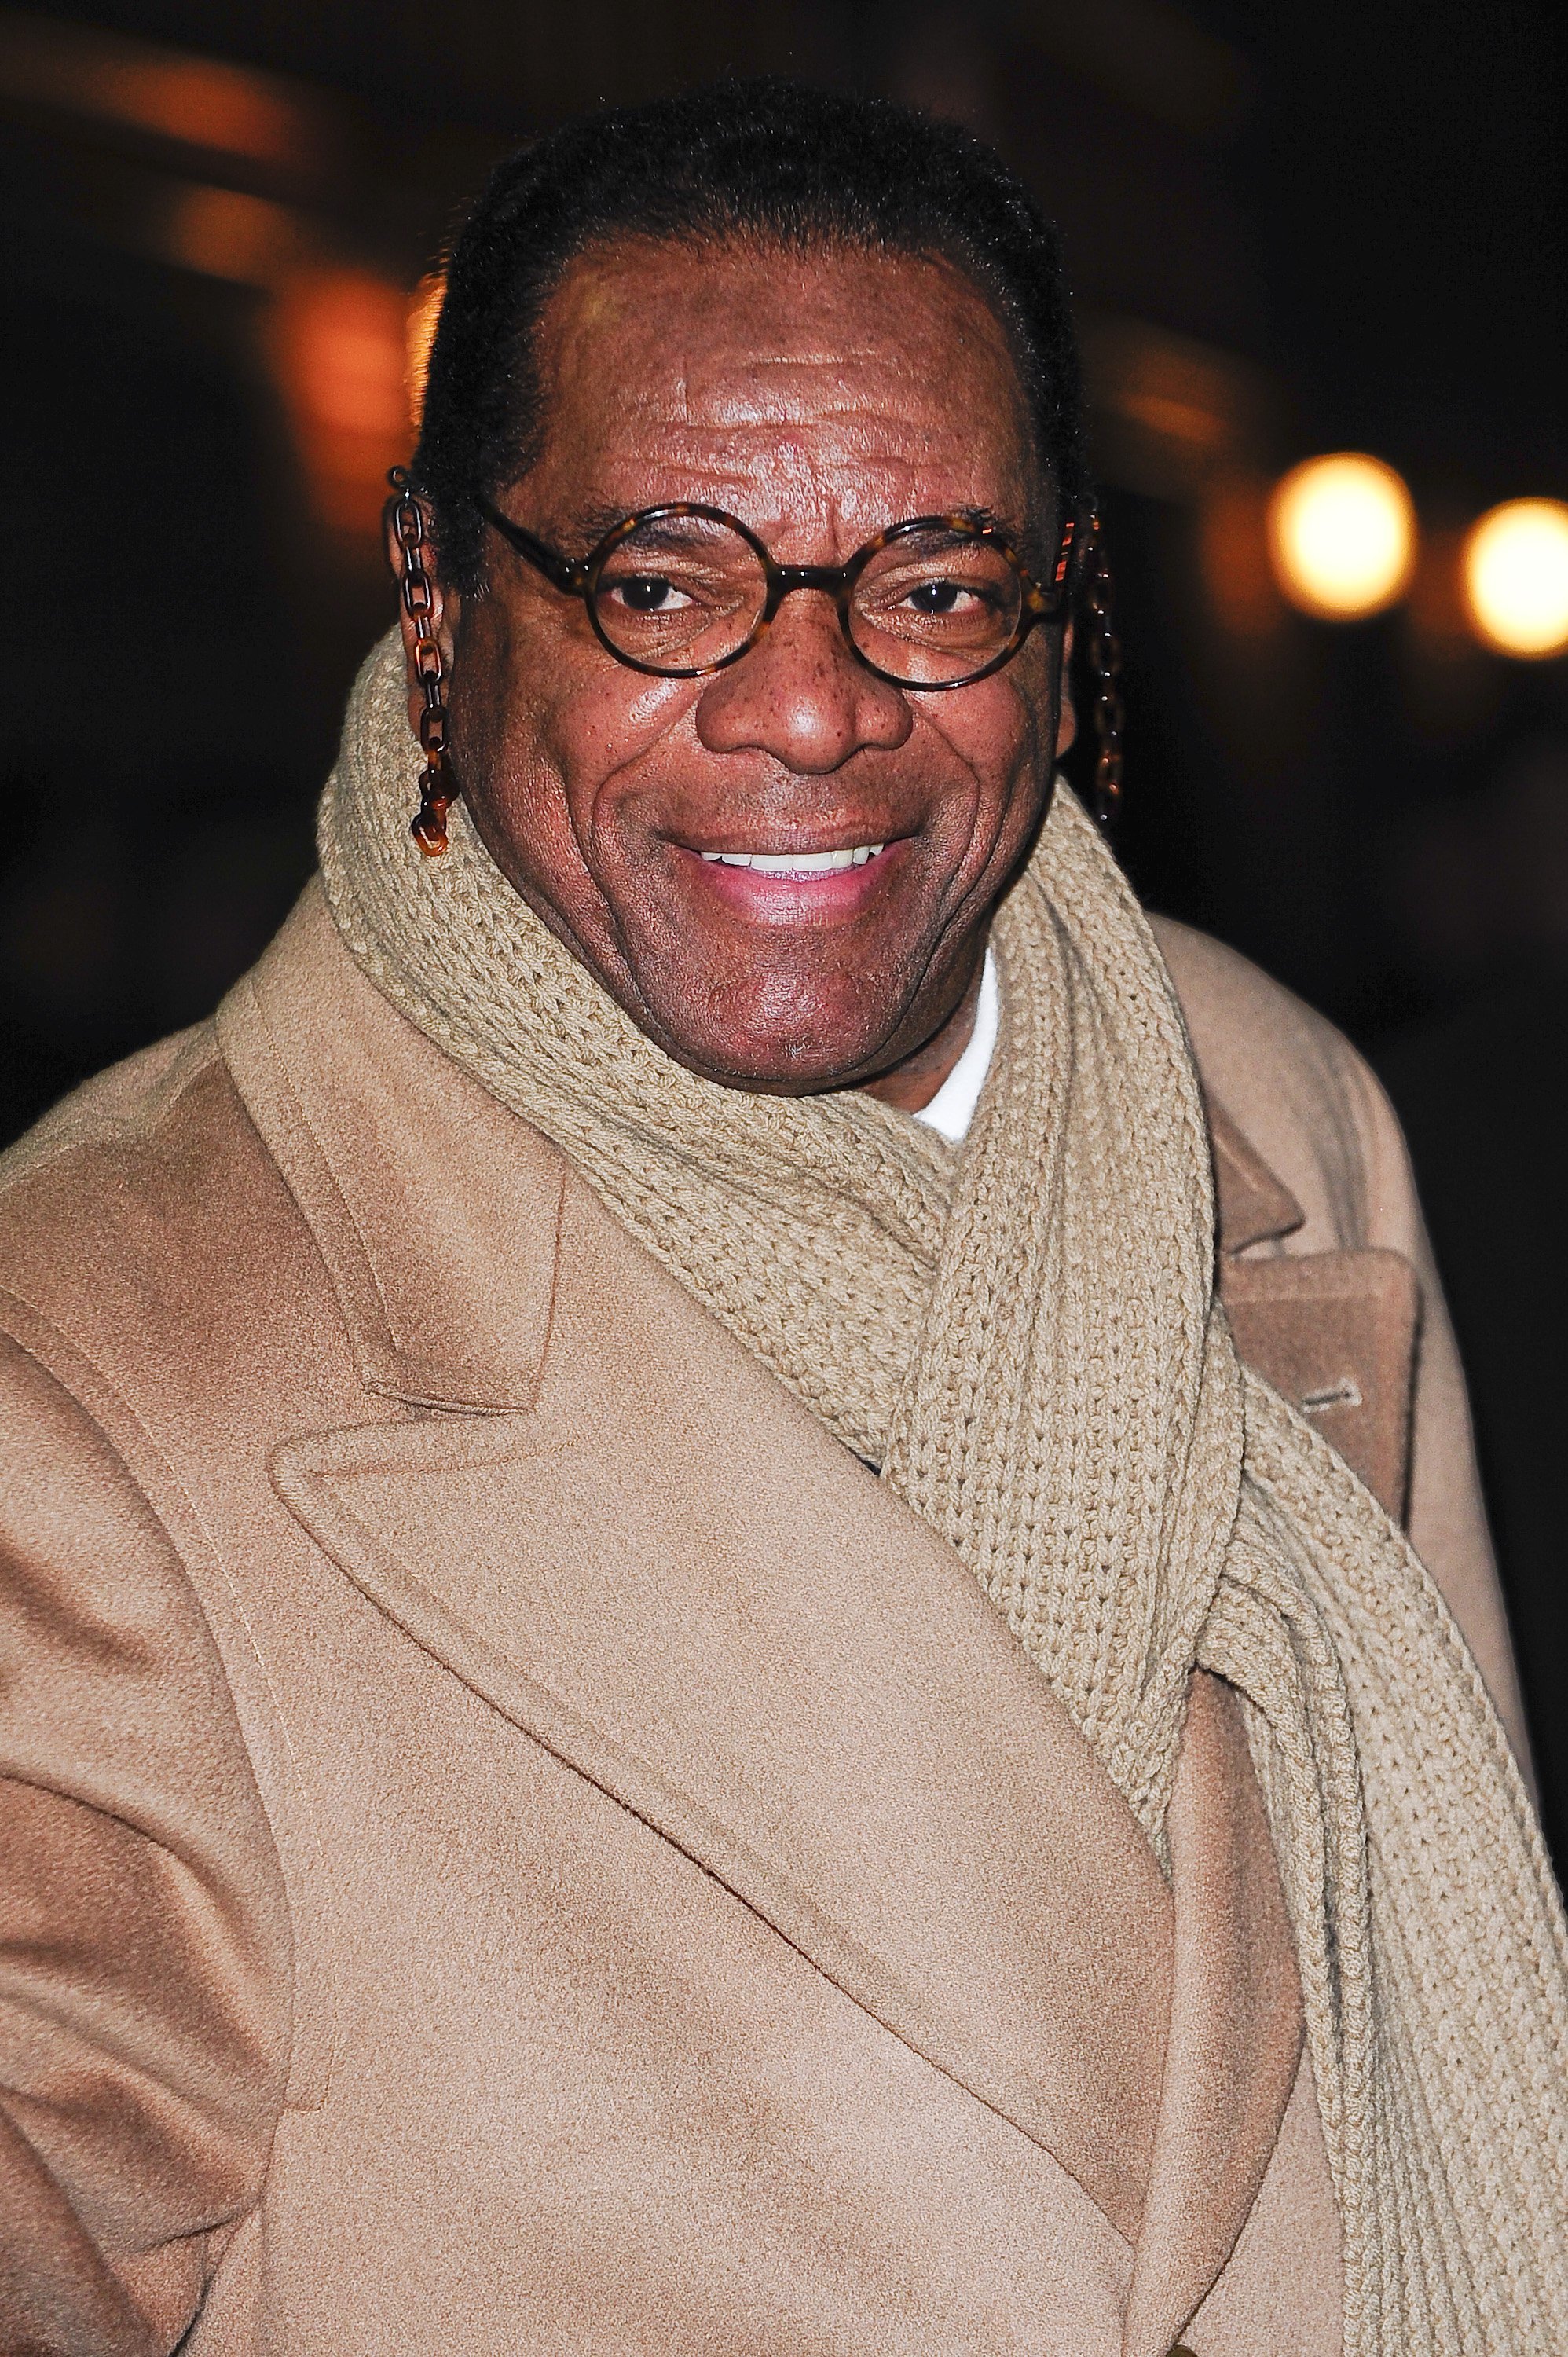 John Witherspoon visits the "Late Show With David Letterman" on Dec. 21, 2009 in New York City | Photo: Getty Images